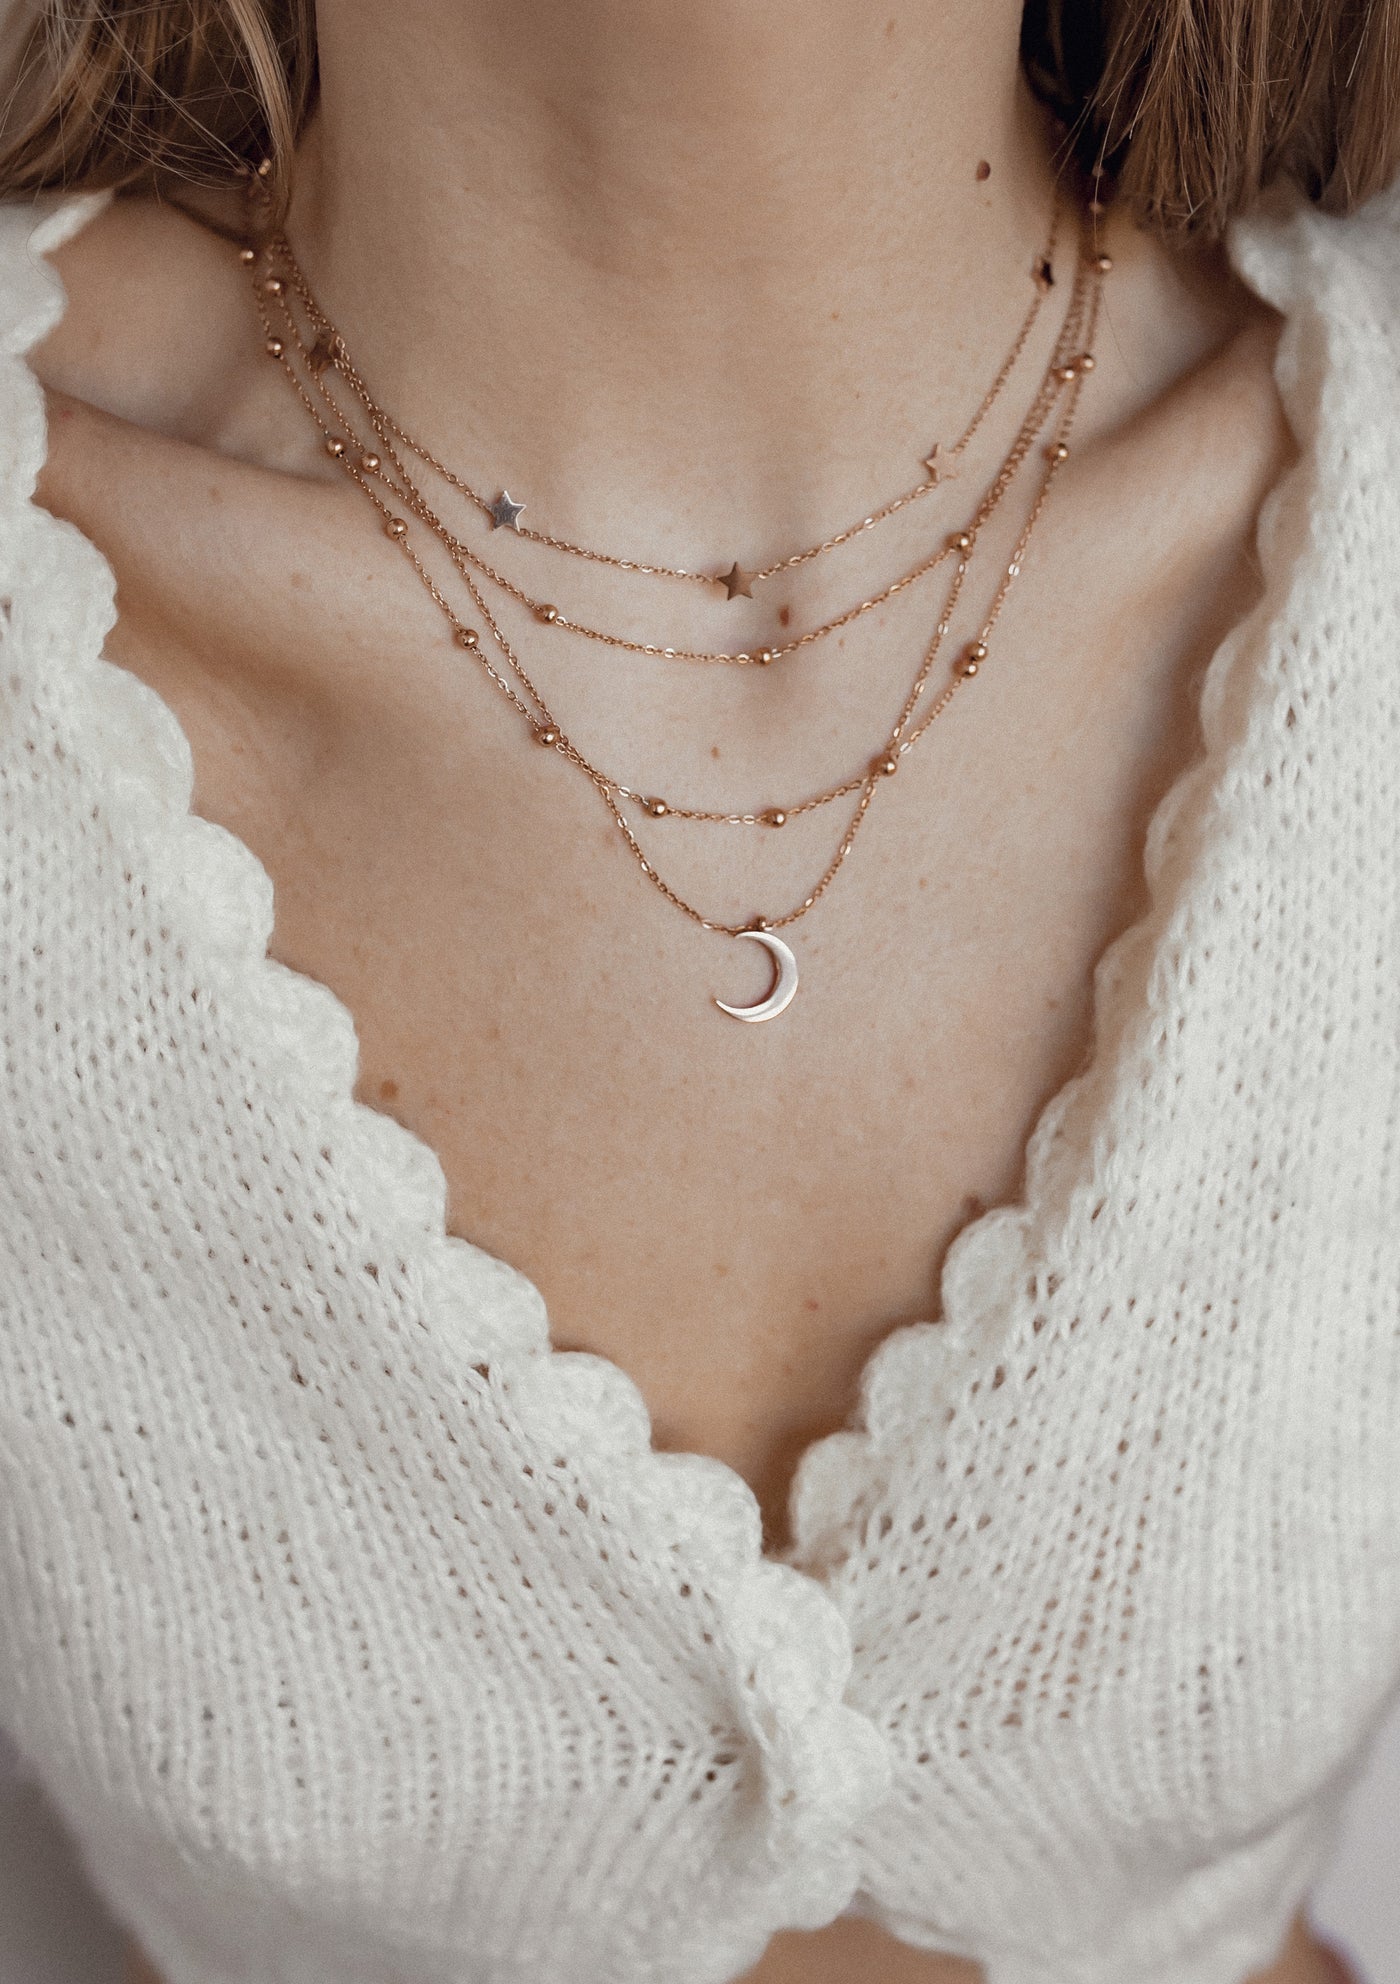 Half Moon Delicate Necklace Rose Gold